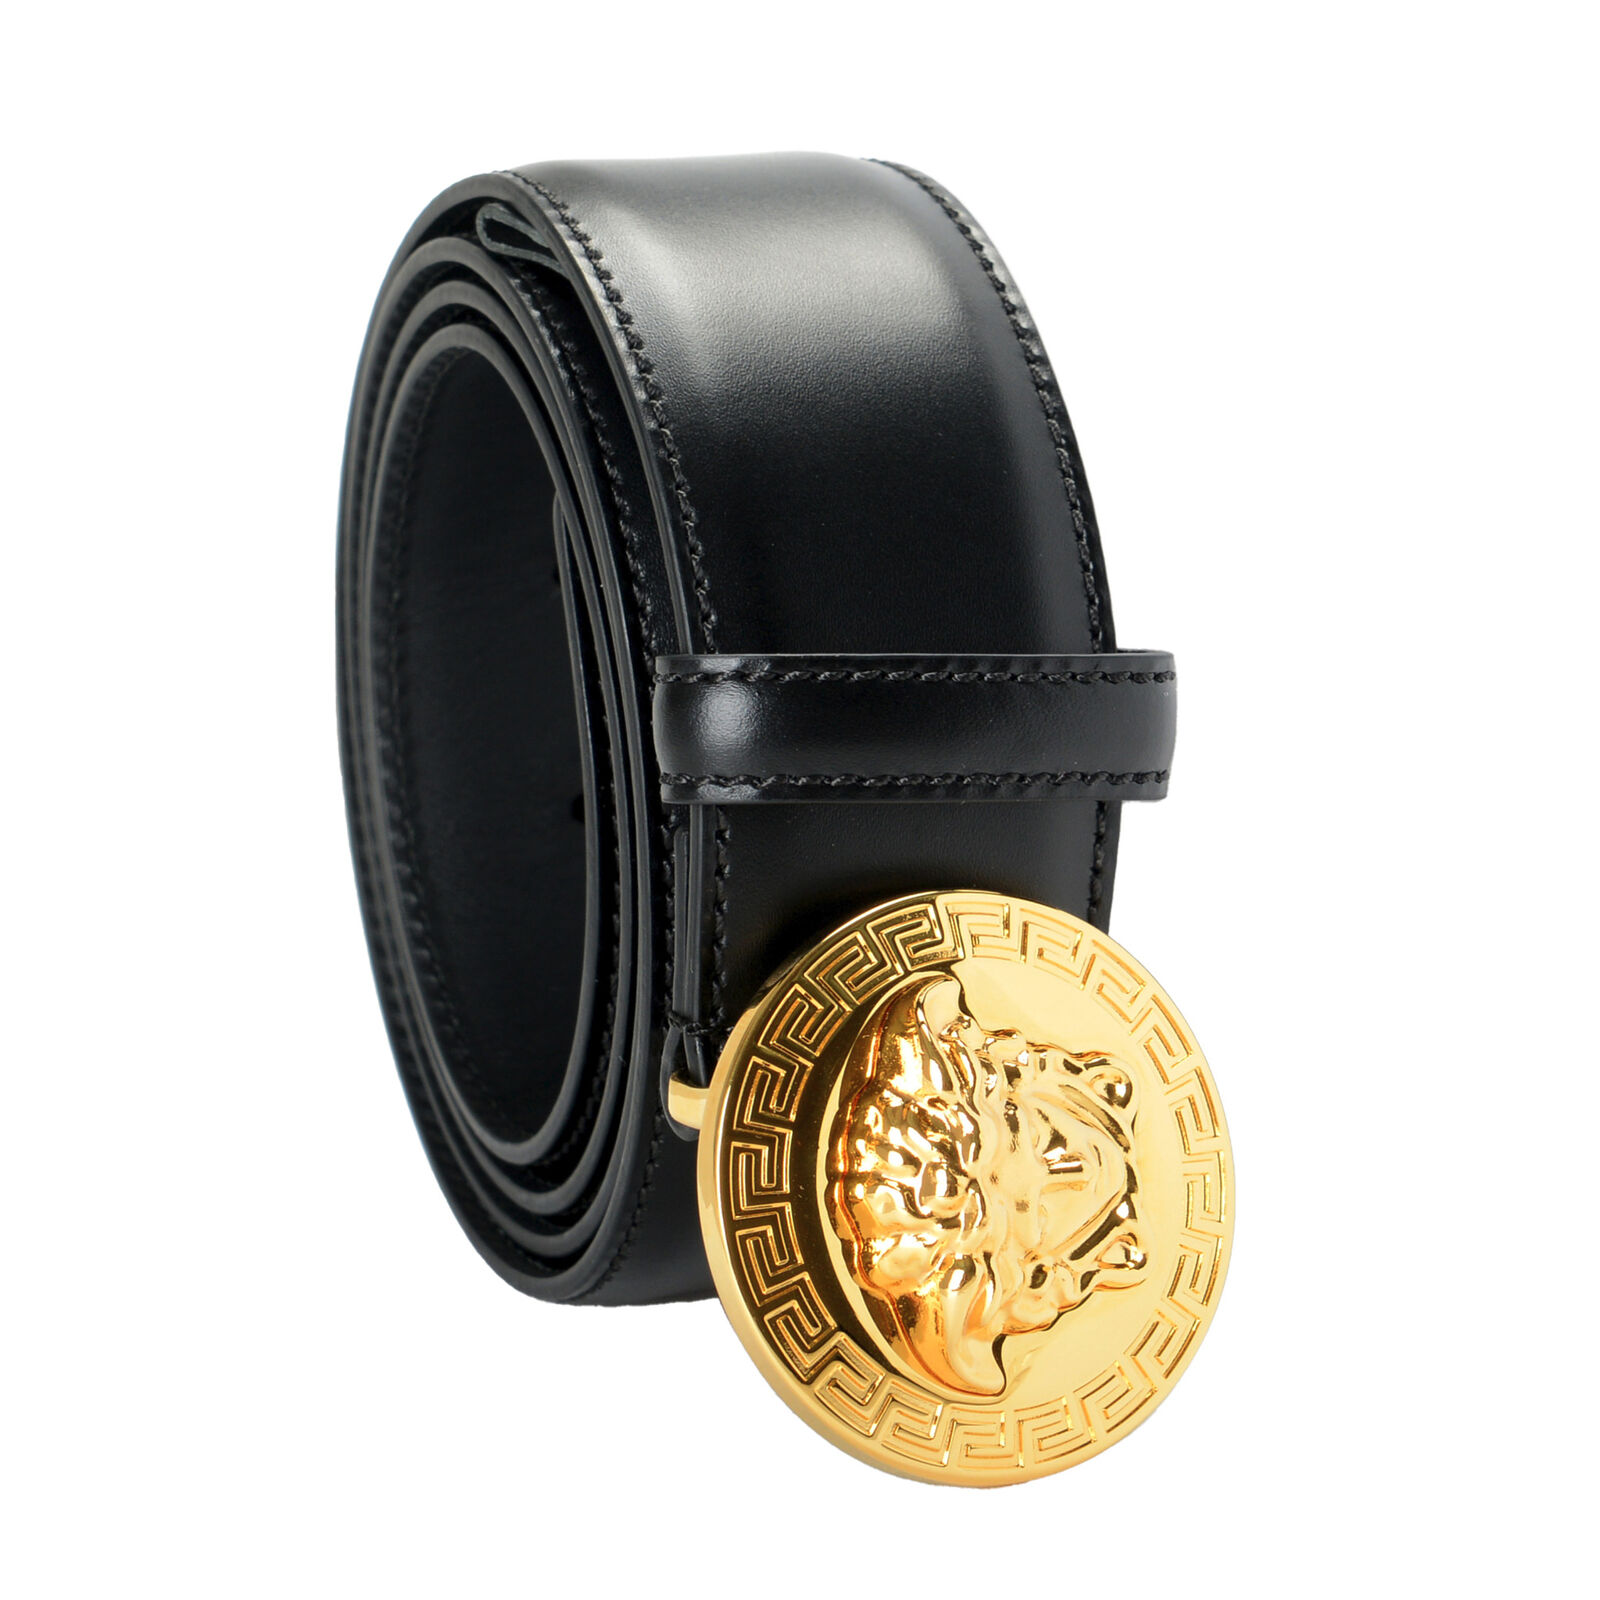 Versace Collection men's belt - Made in Italy, Removable Buckle, Running  small*